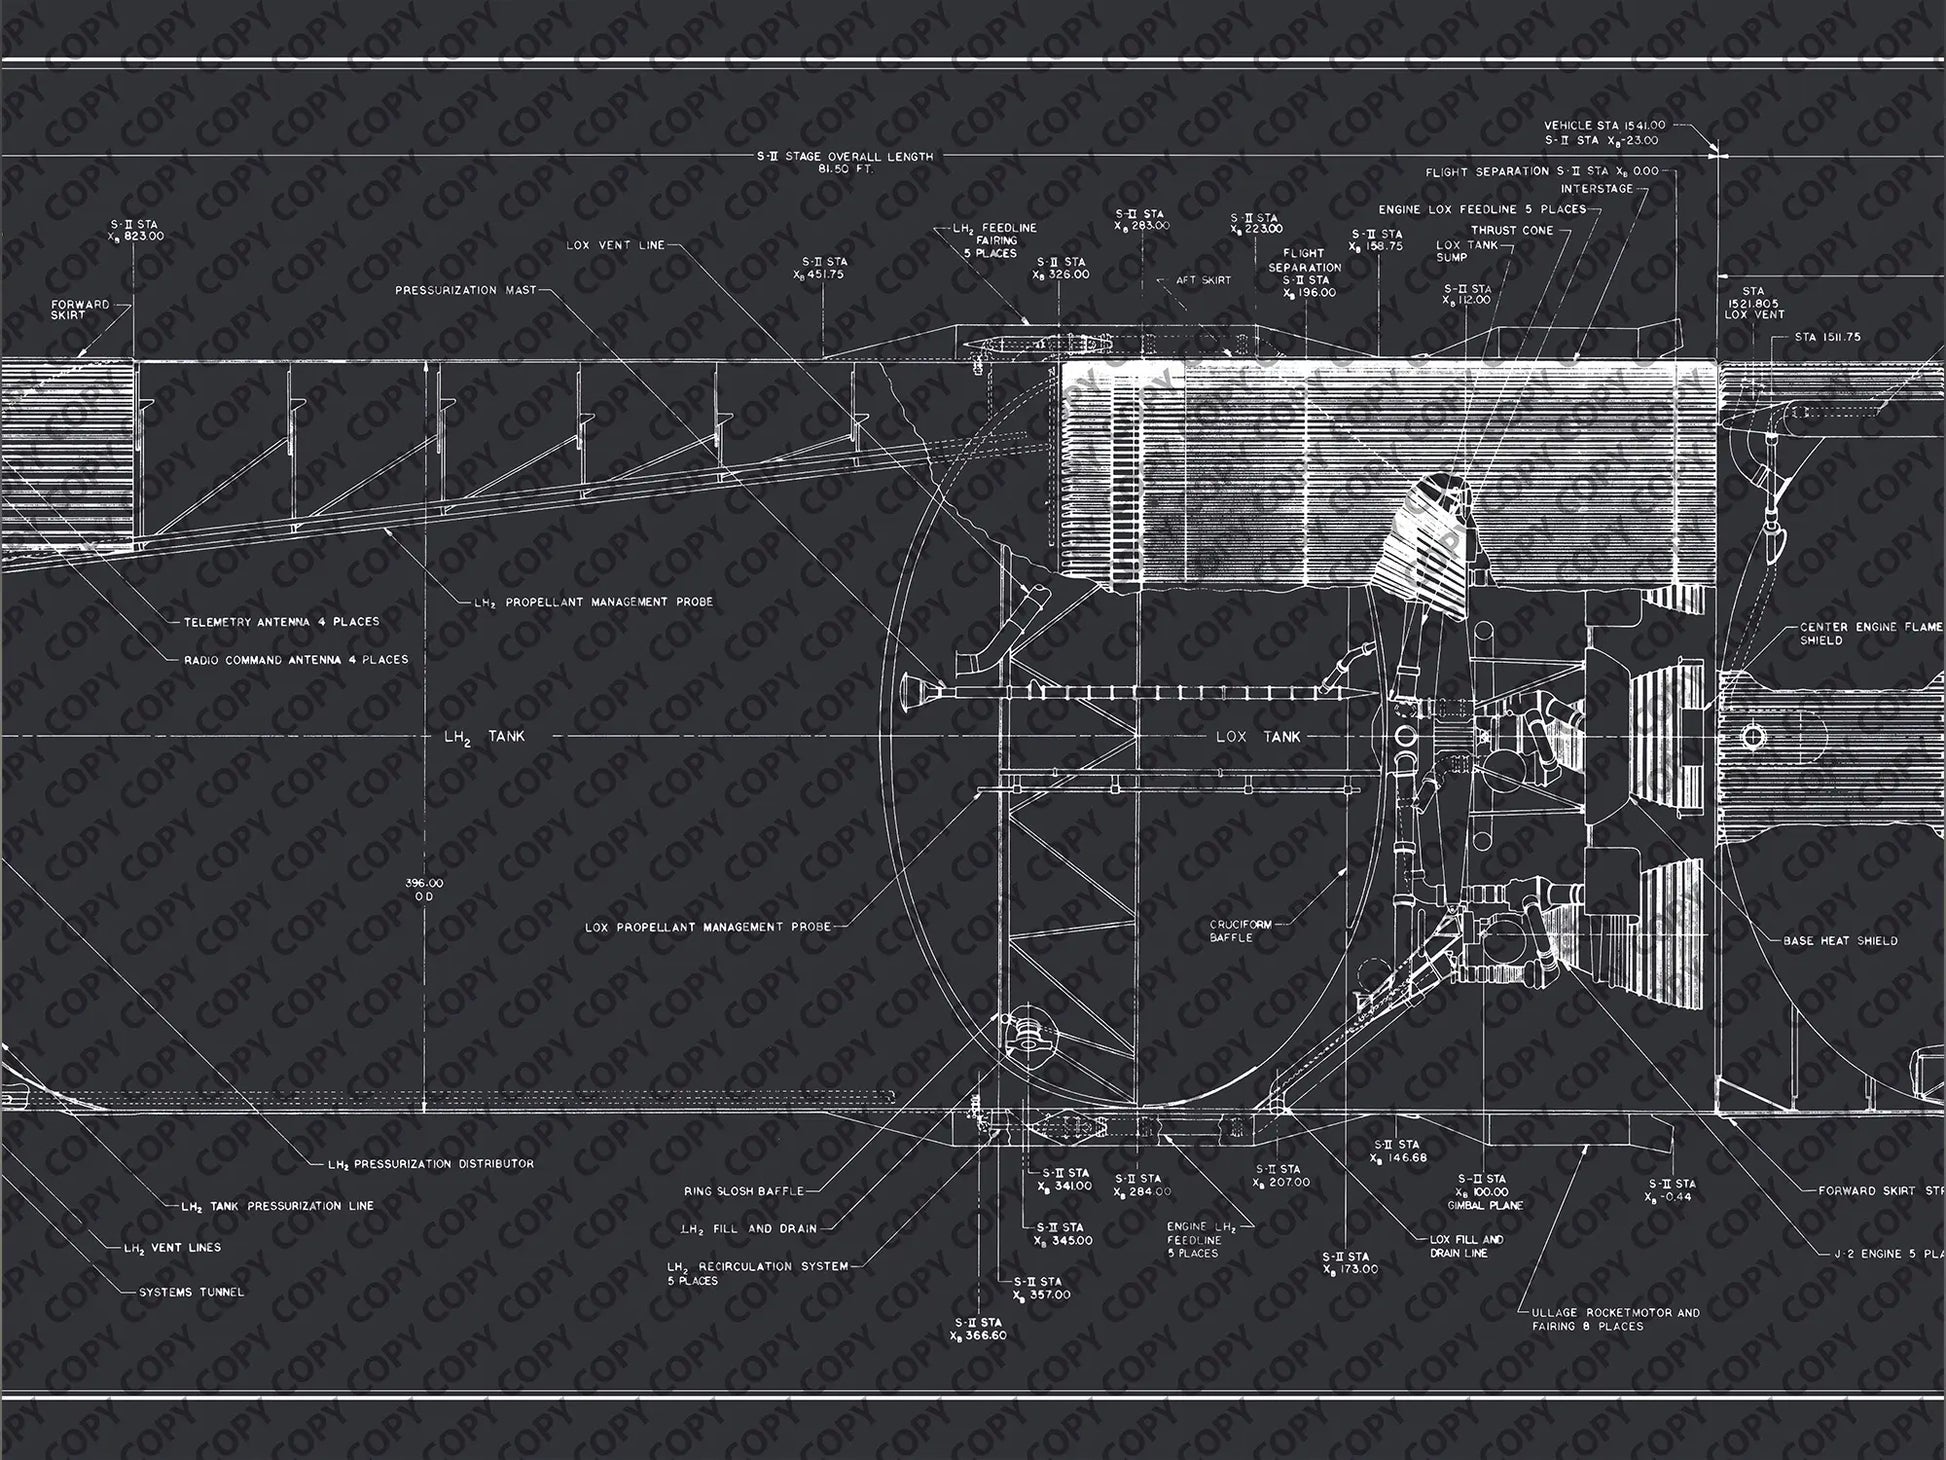 Apollo Saturn V | Rocket Blueprint Posters | Technical Diagram | NASA | A close-up view of a detailed blueprint section of the NASA Saturn V rocket. The schematic features various technical labels and diagrams, showing components like the LOX tank, propellant management probe, and center engine flame shield against a dark background.